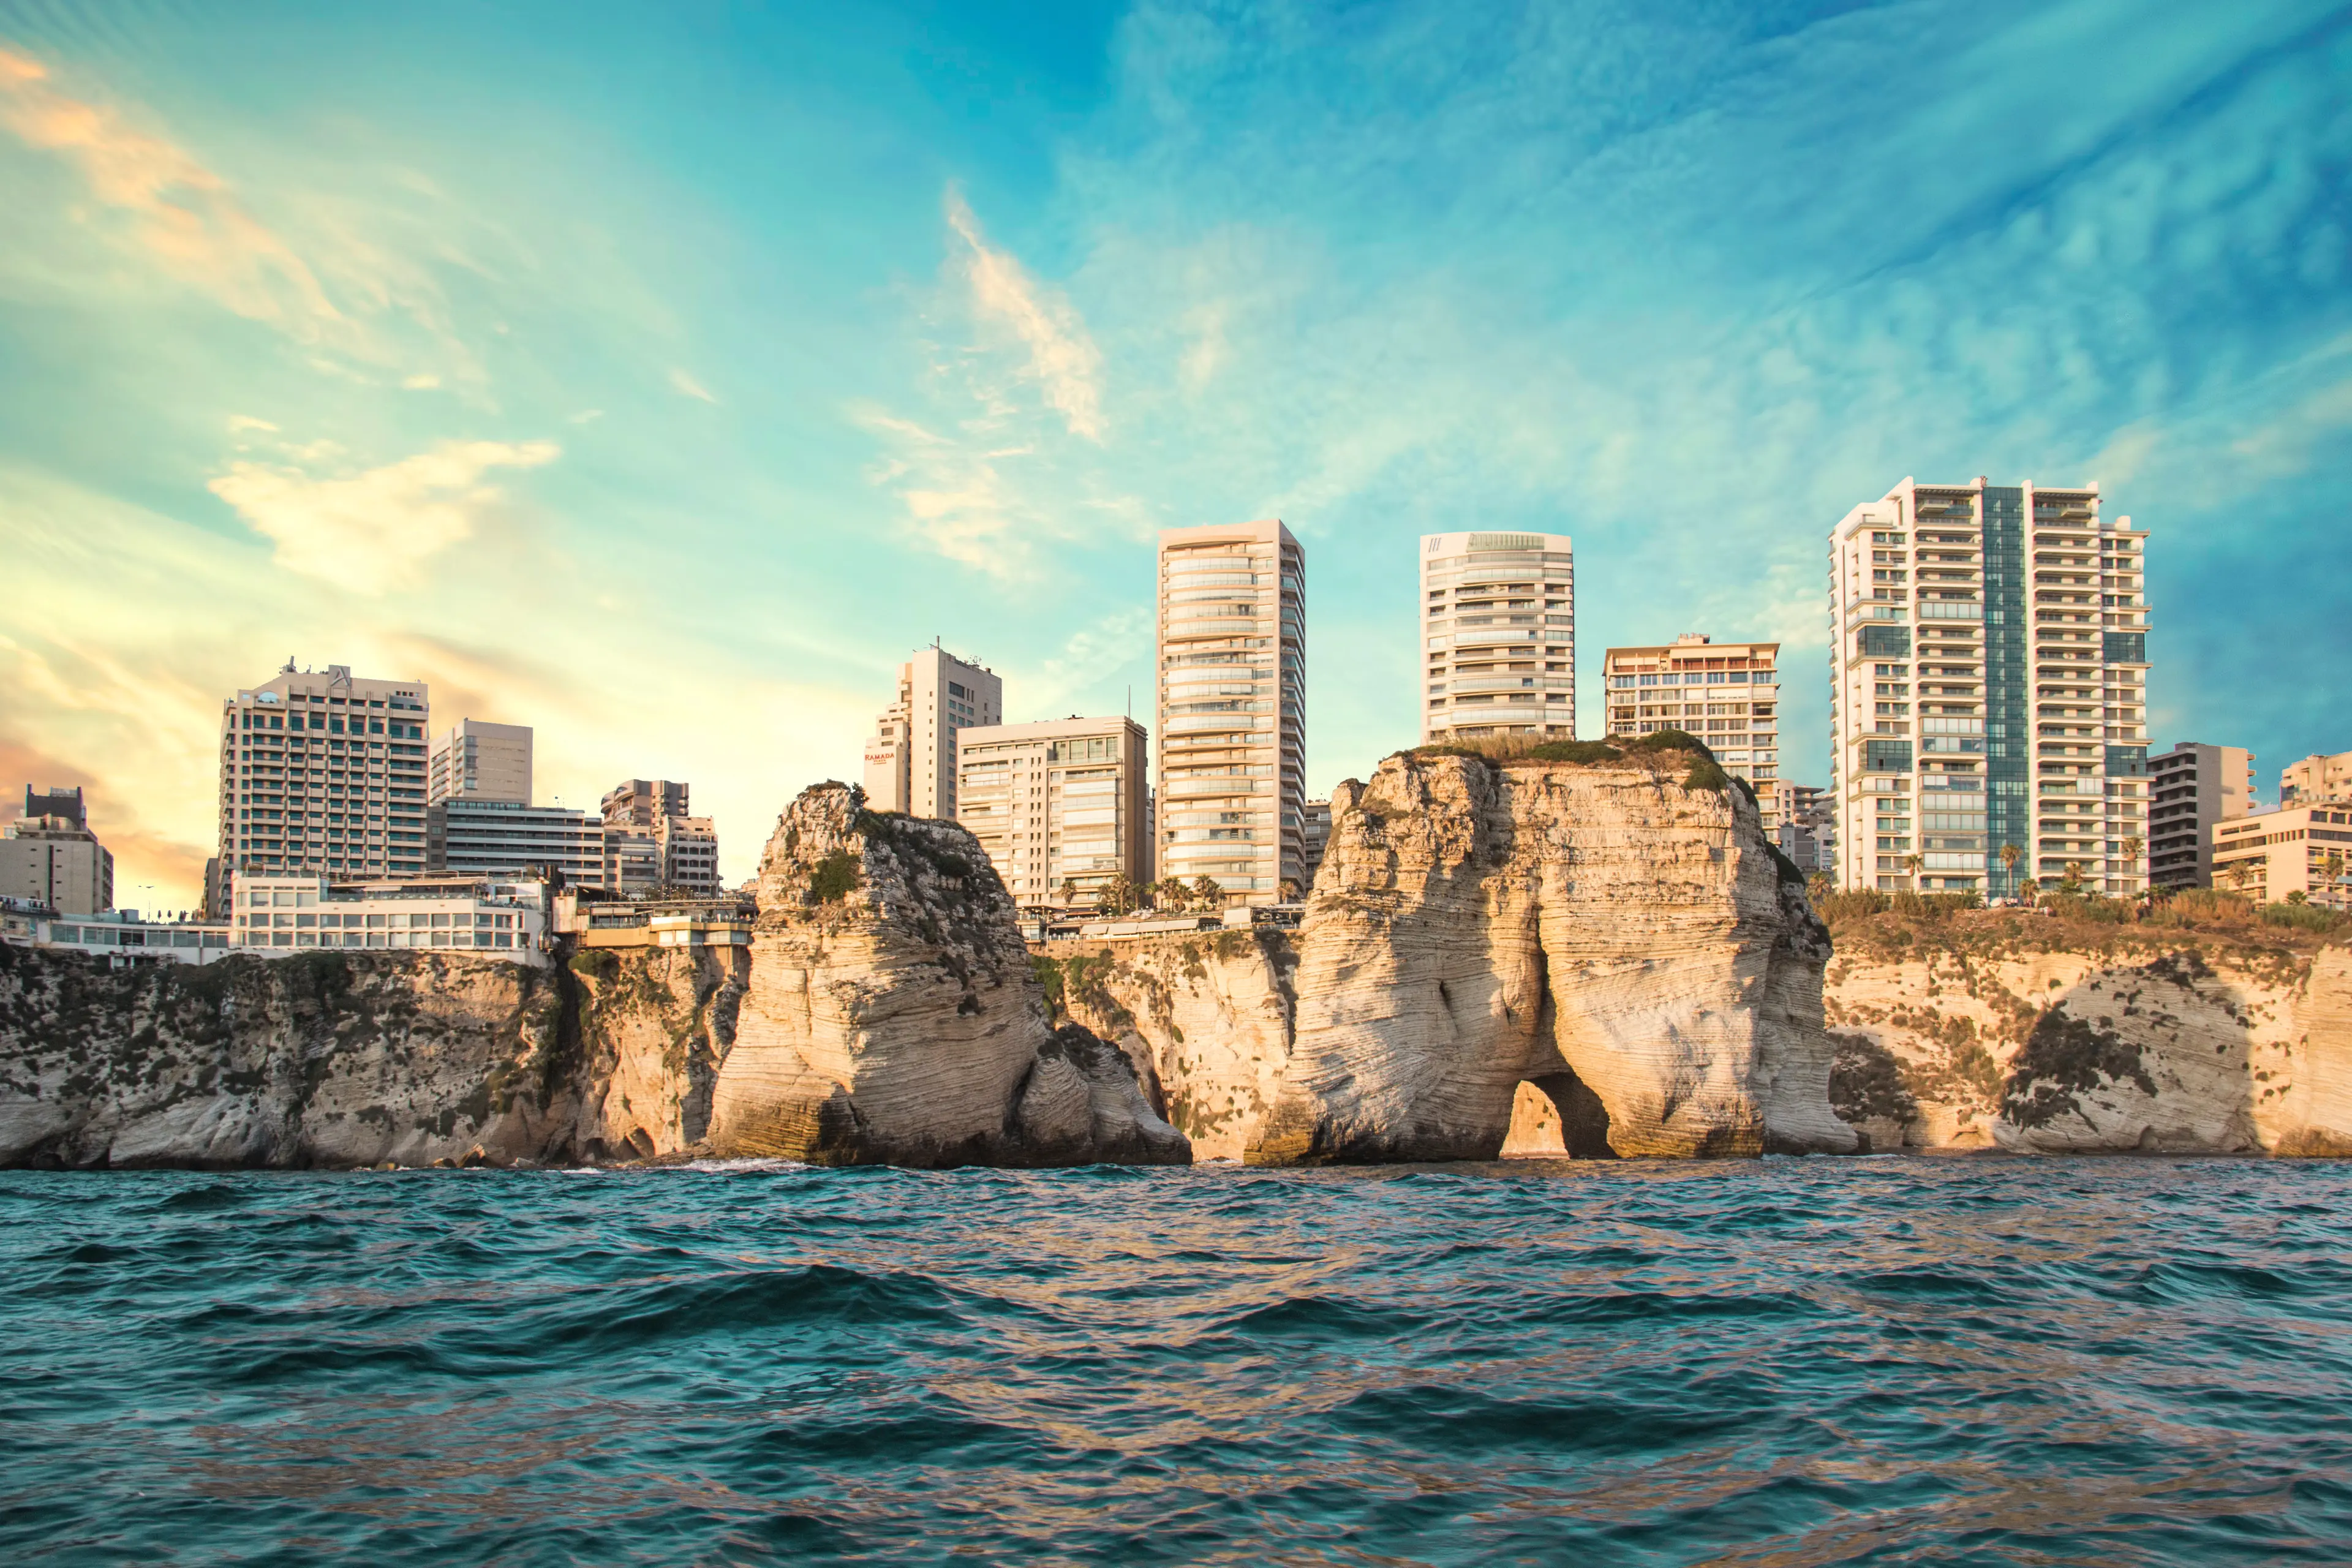 4-Day Solo Culinary and Sightseeing Adventure in Beirut, Lebanon